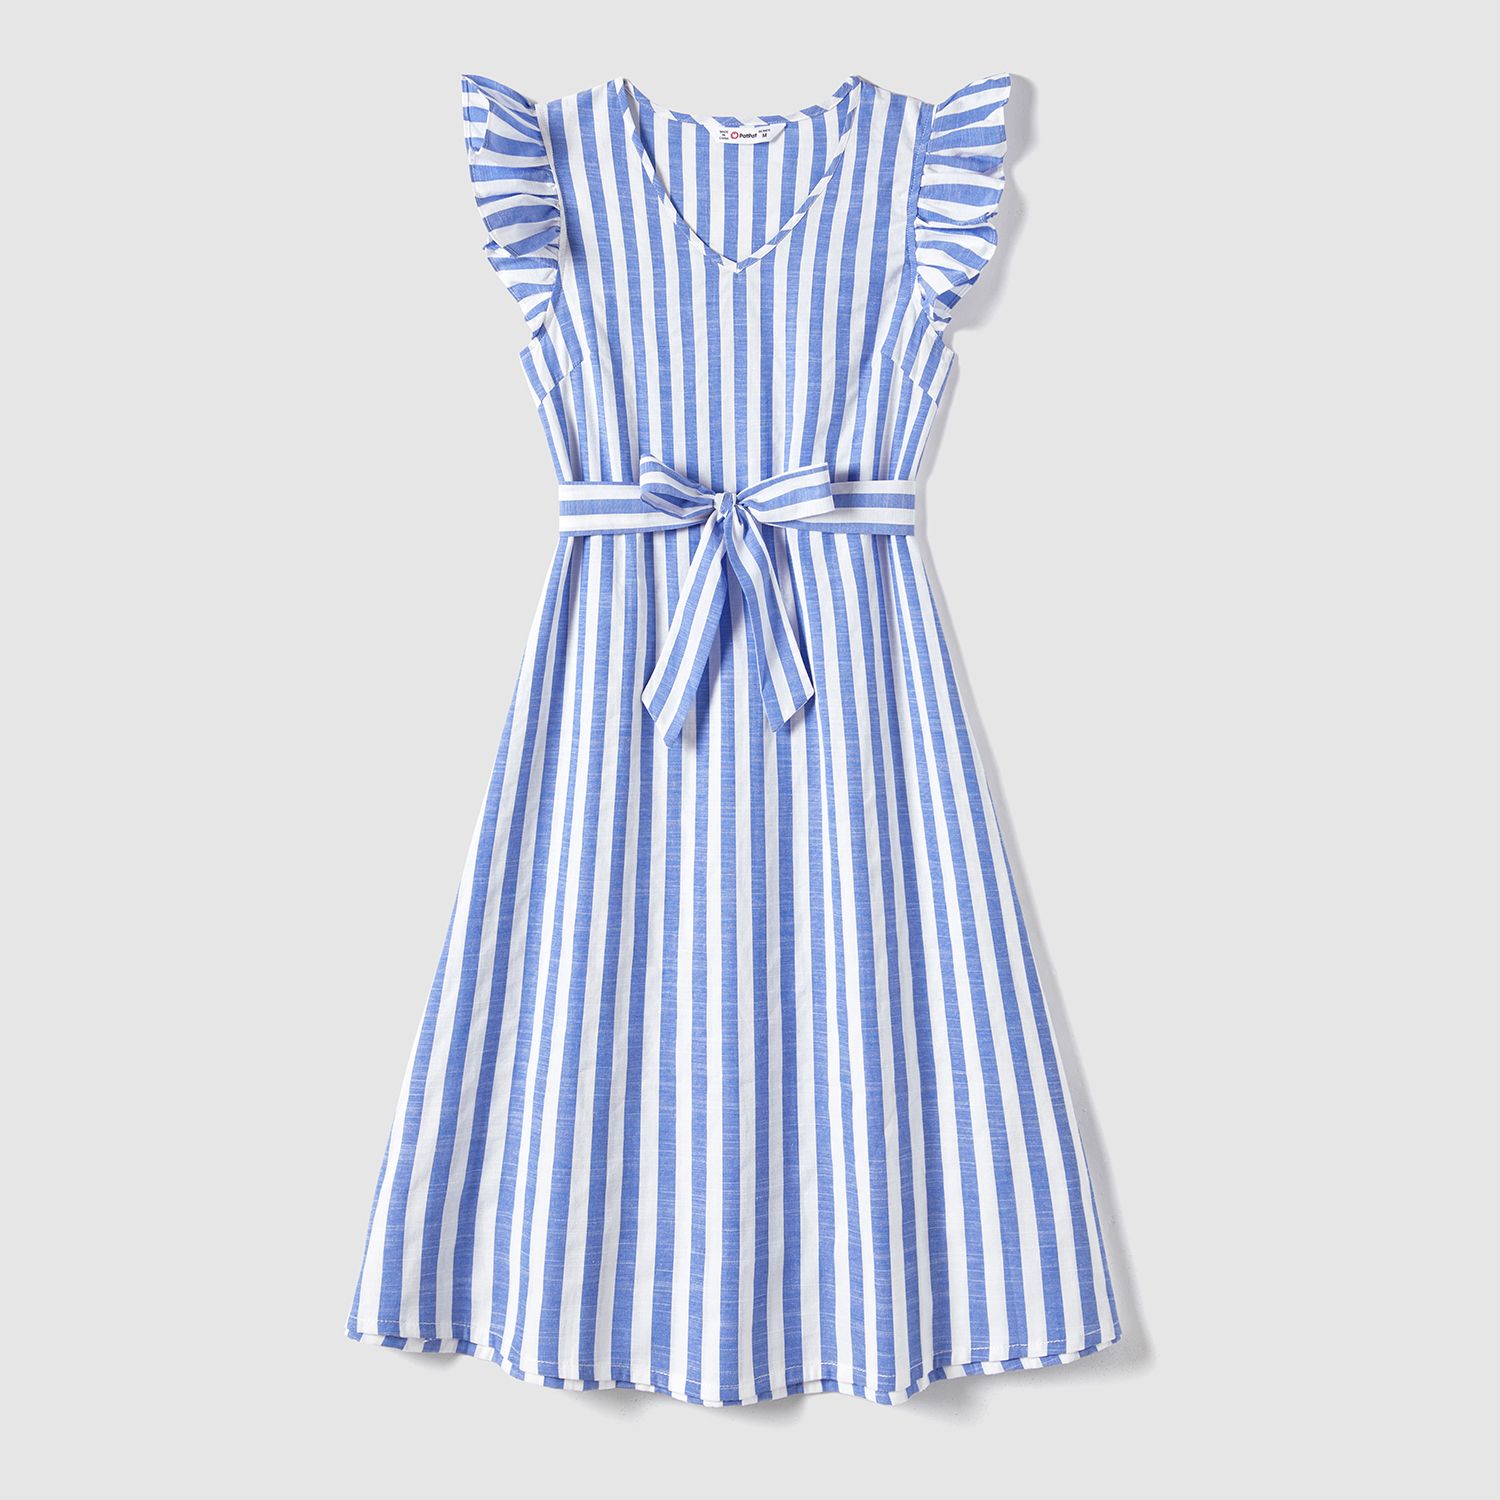 Family Matching Stripe Belted Dresses And 100% Cotton Short-sleeve T-shirts Sets